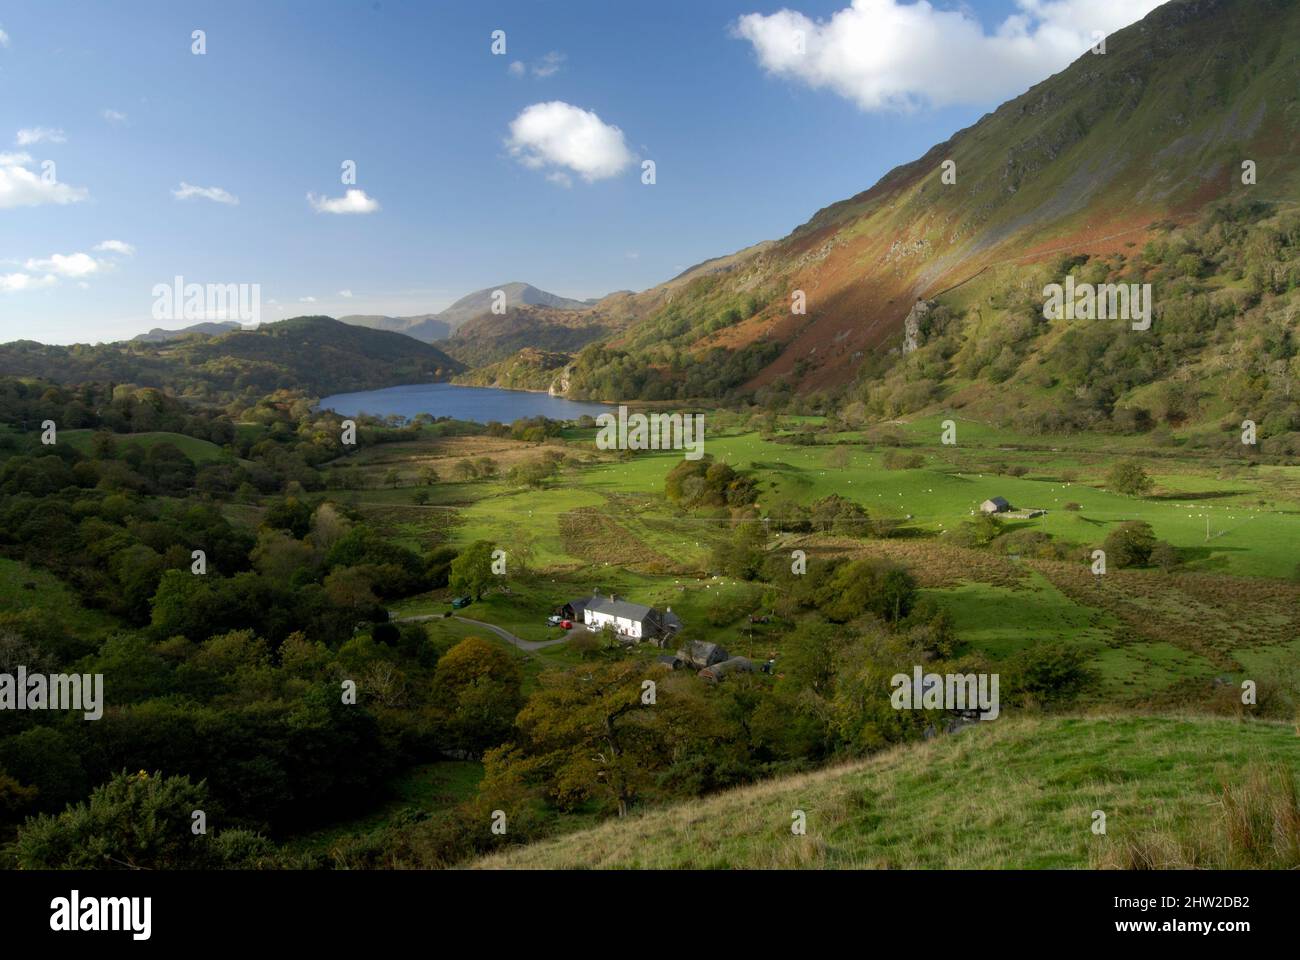 The Nant Gwynant Valley in Snowdonia, WALES Stock Photo